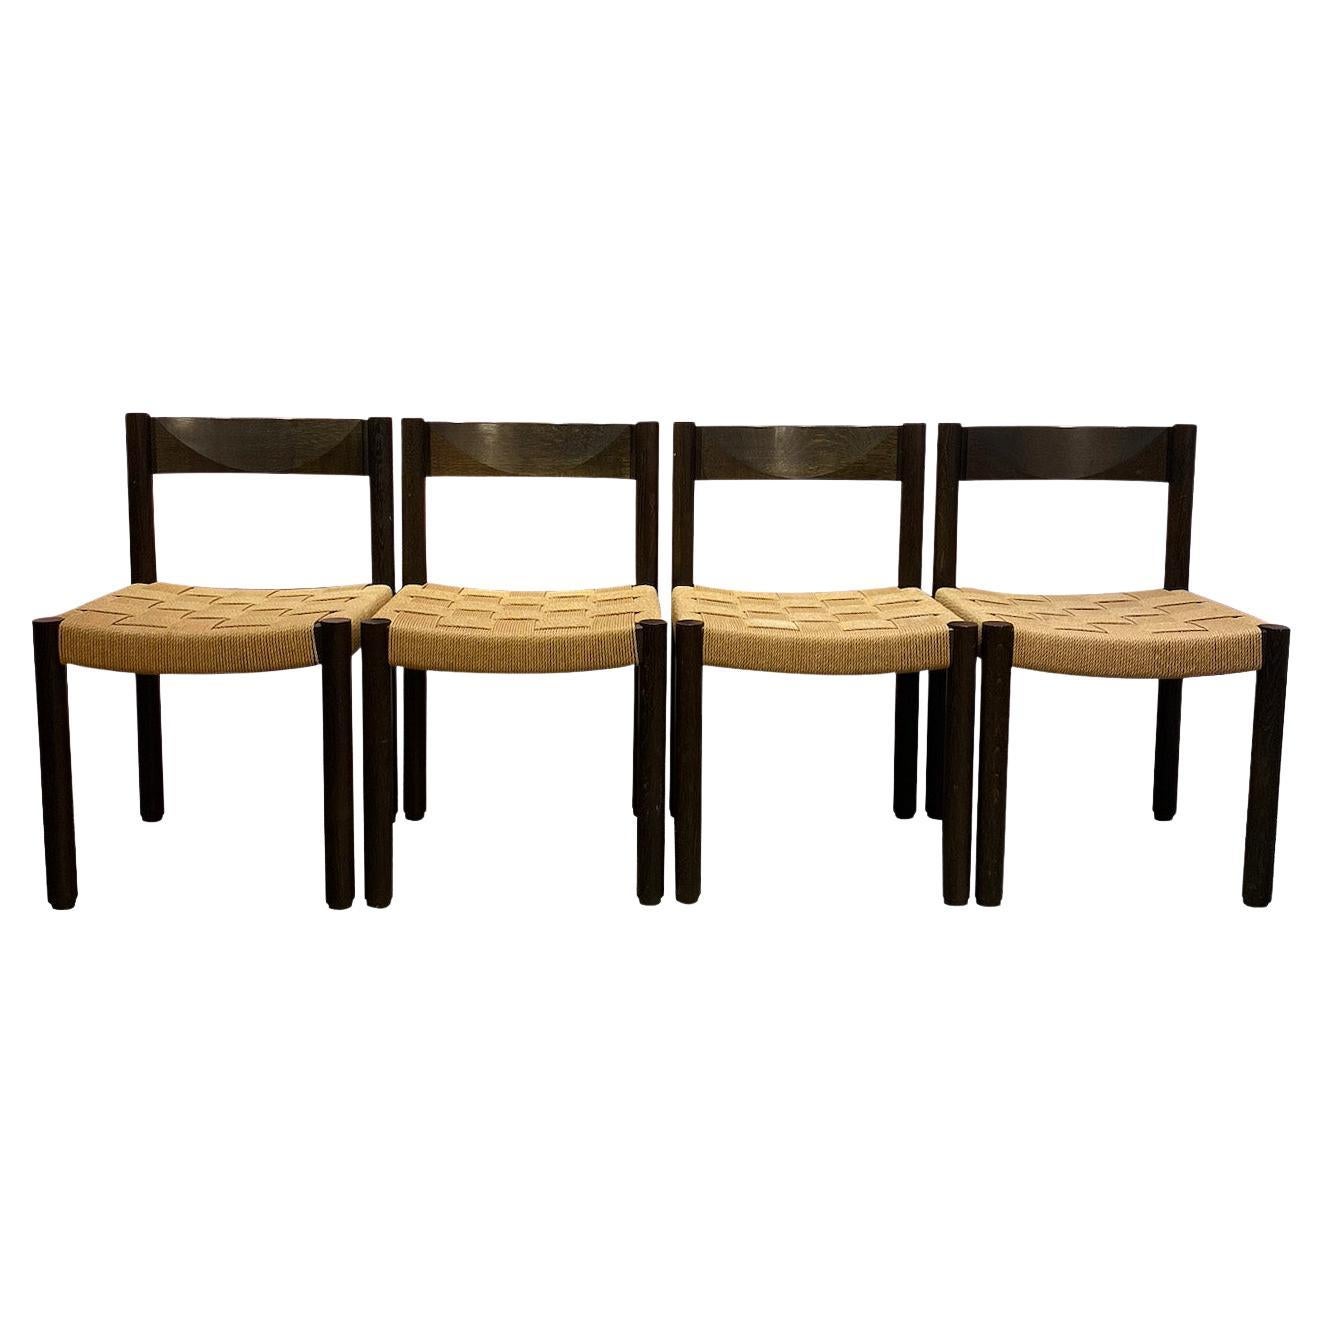 Set of 4 wooden chairs,  Circa 1960. 
Designed by Swiss designer Robert Haussmann  for Dietiker. 

Structure in stained oak, seat in hand-woven rope. Good condition. 

